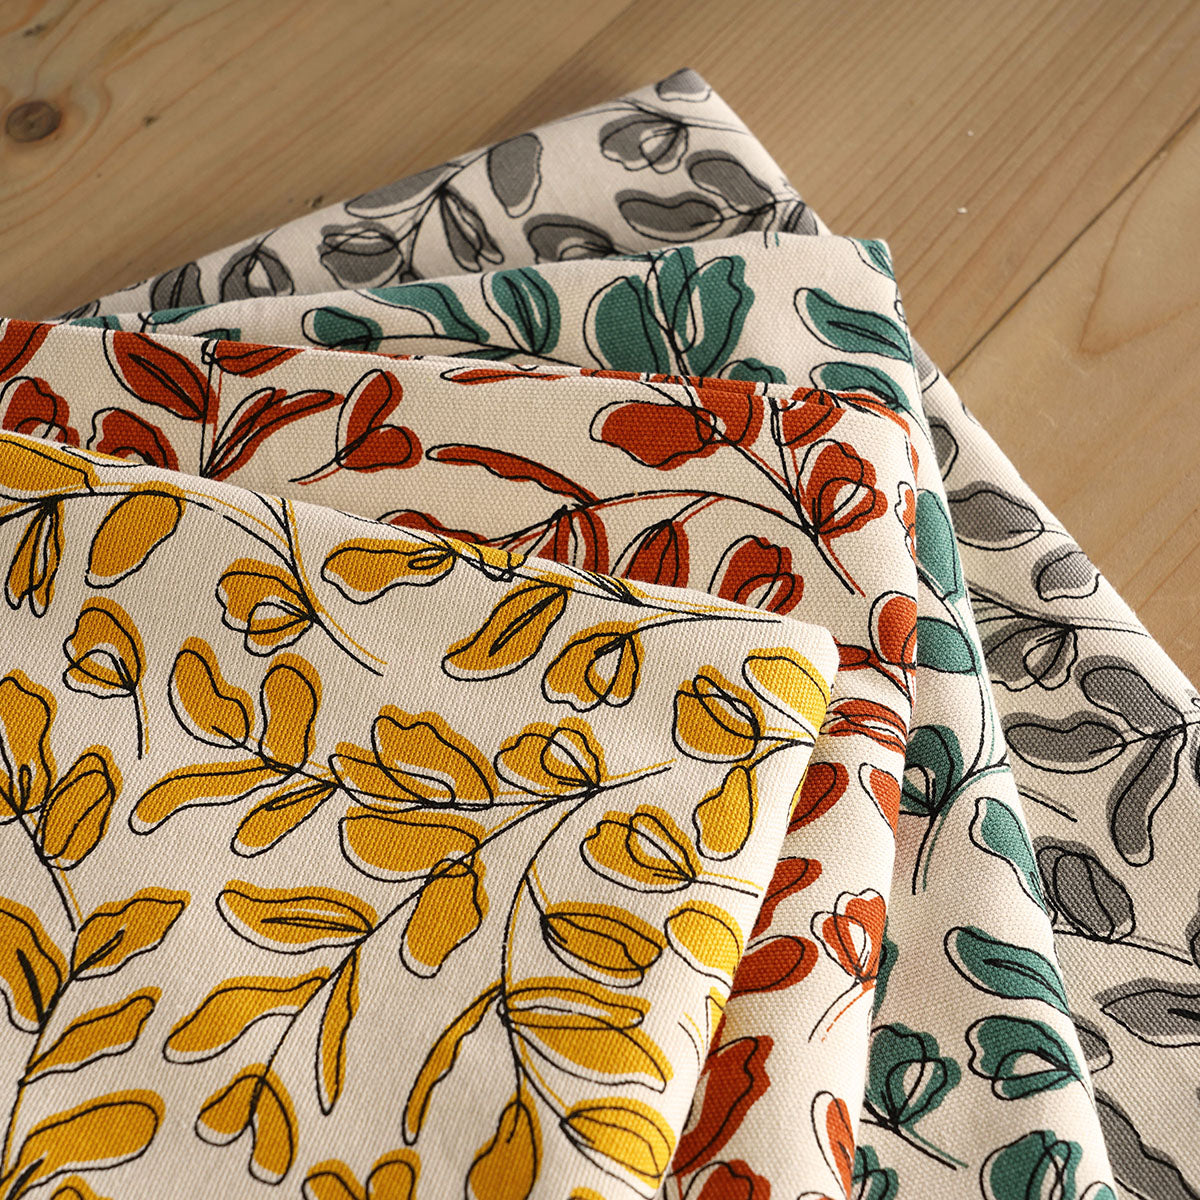 MODERN RETRO - Mustard yellow cotton table cloth with leaf print, Sizes available